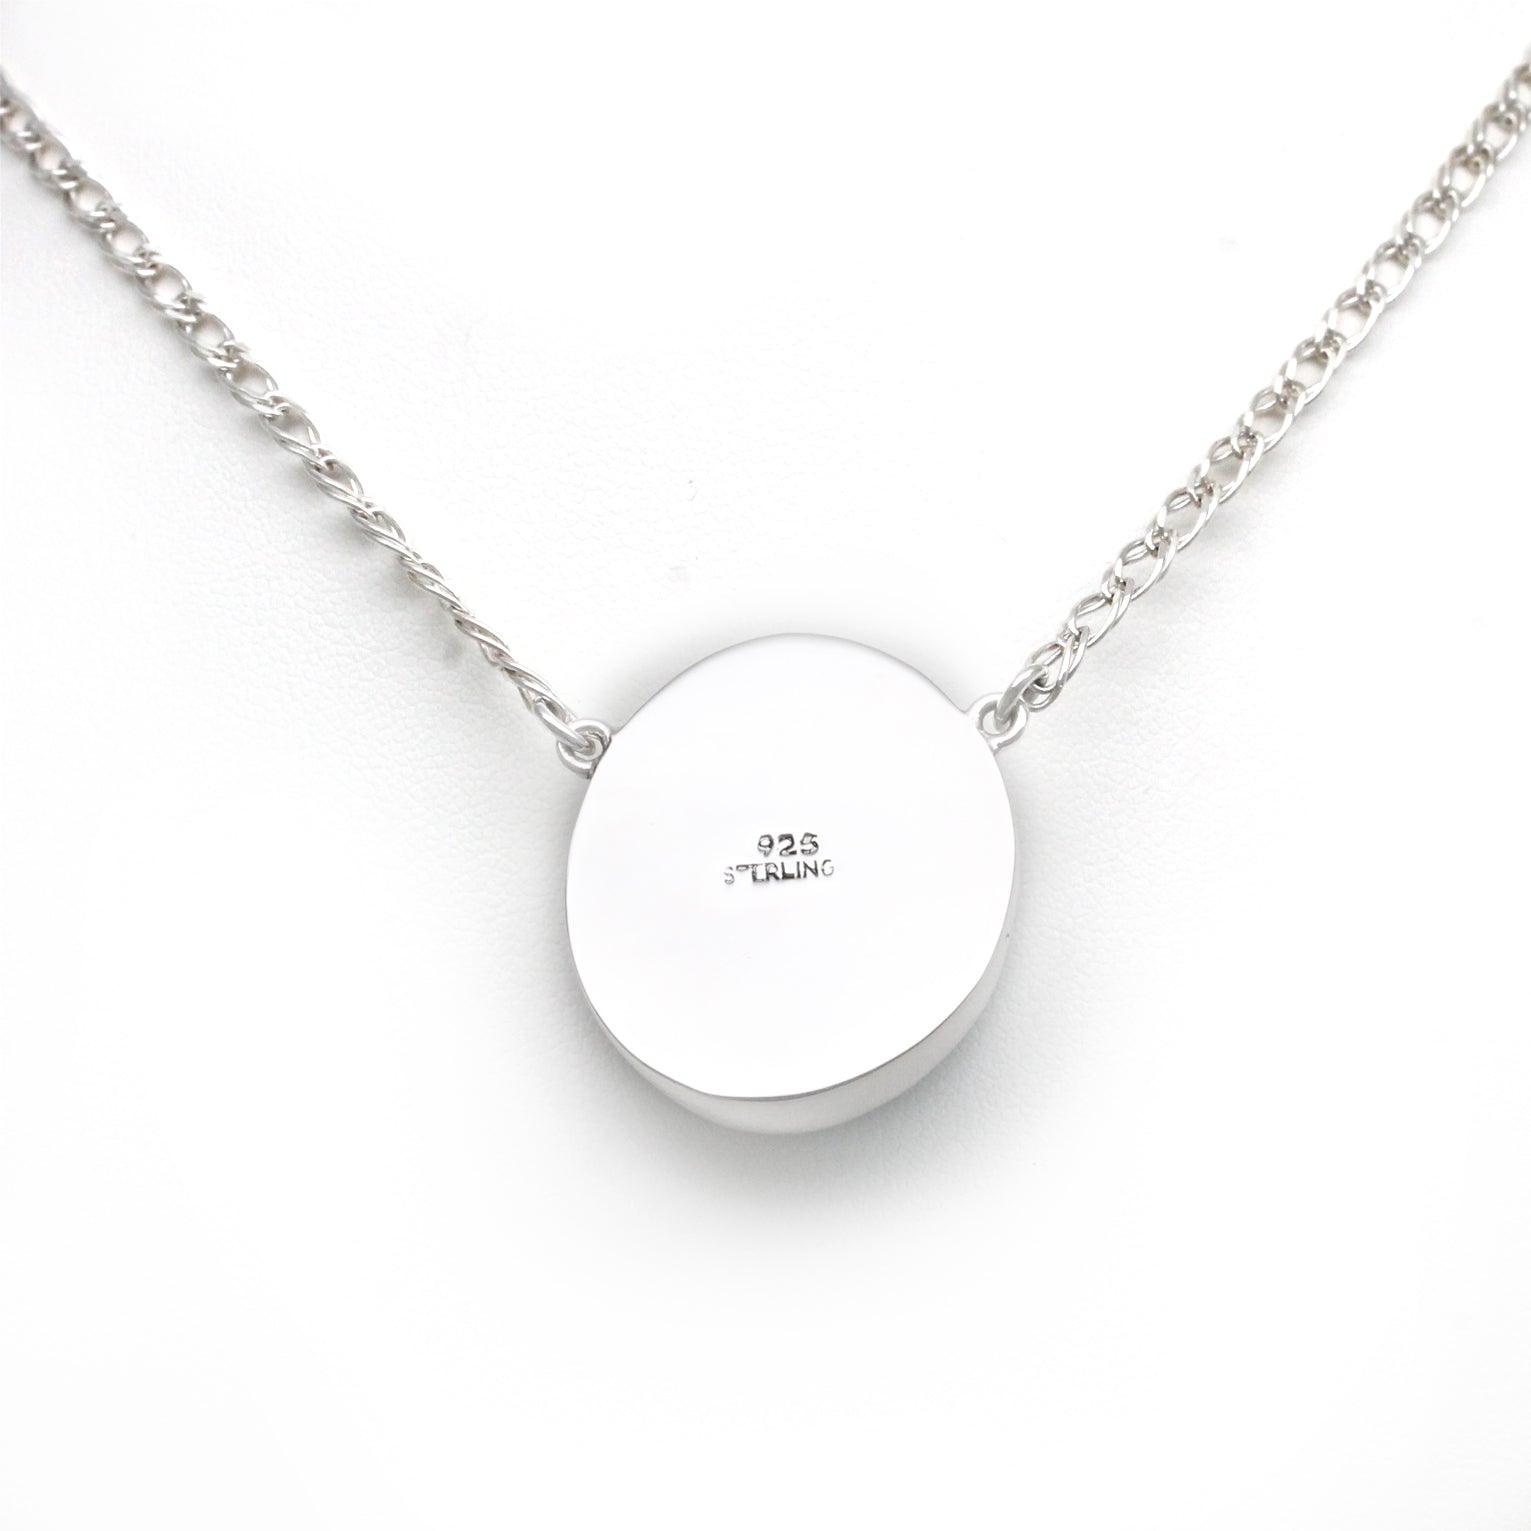 Blister Mabe Pearl Silver Necklace